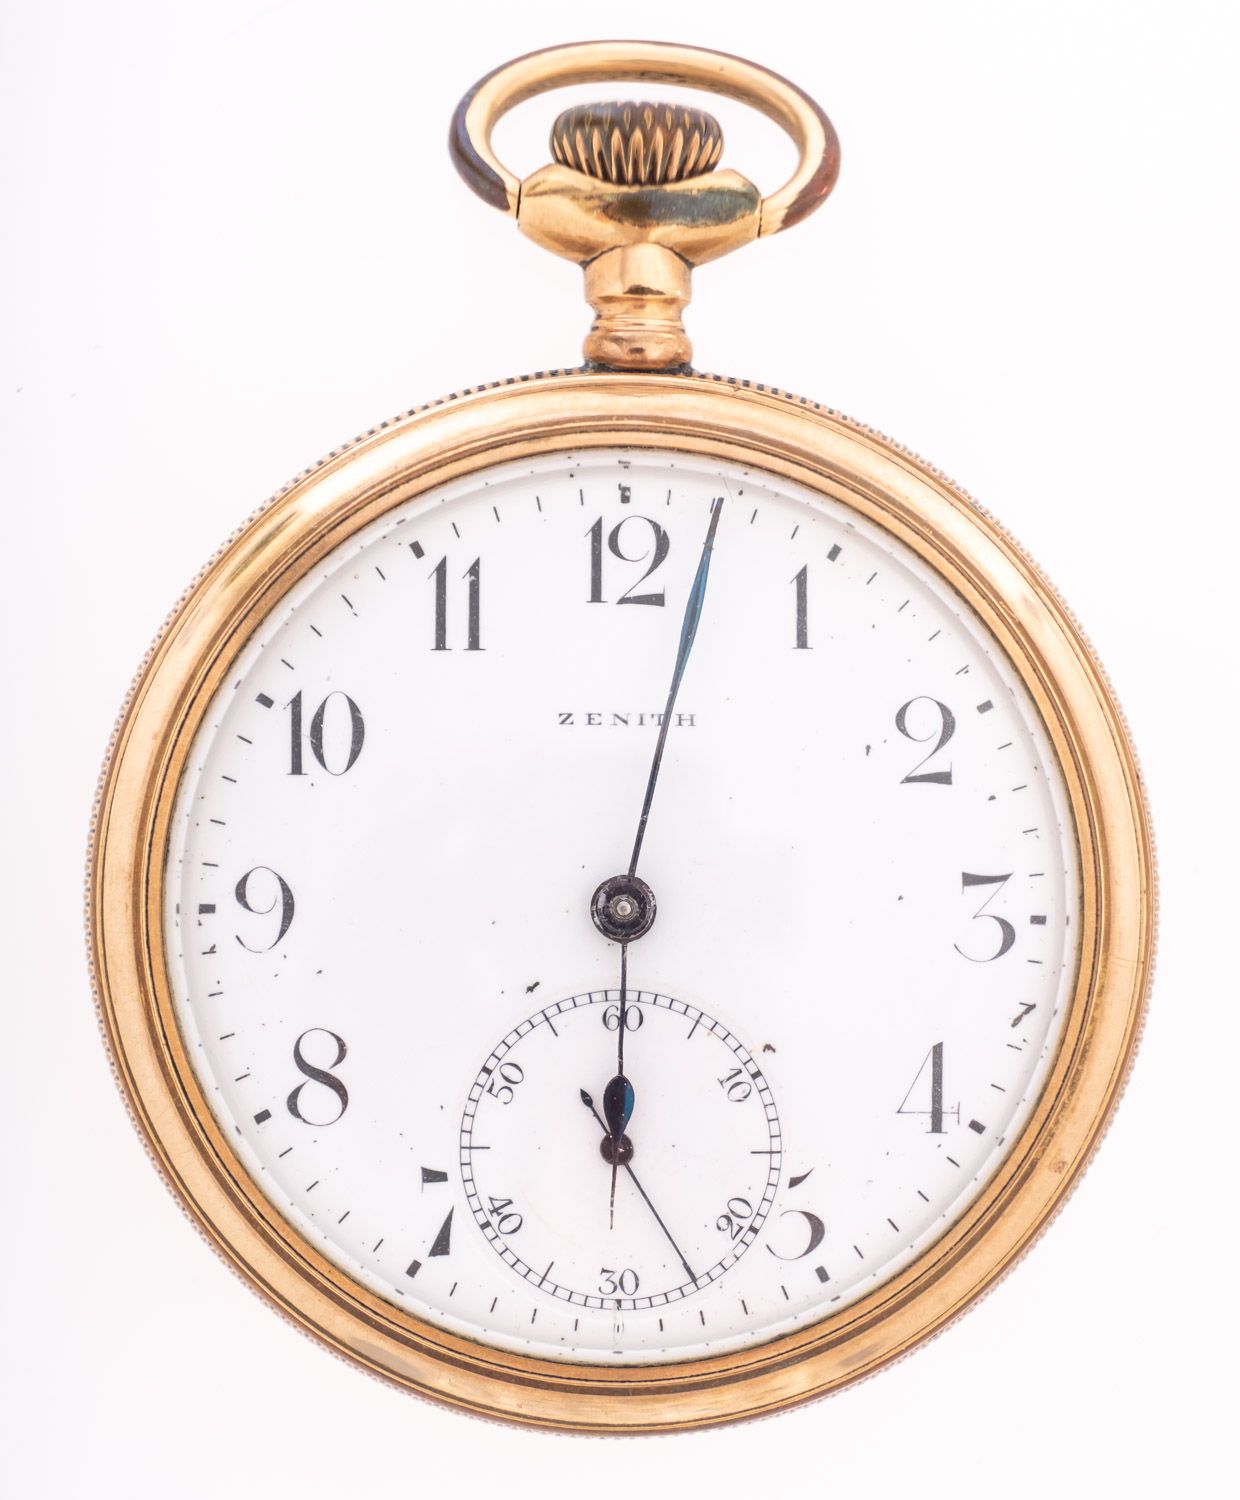 Zenith a gold-plated pocket watch the screw-back case stamped Empress, A.W.C & Co.